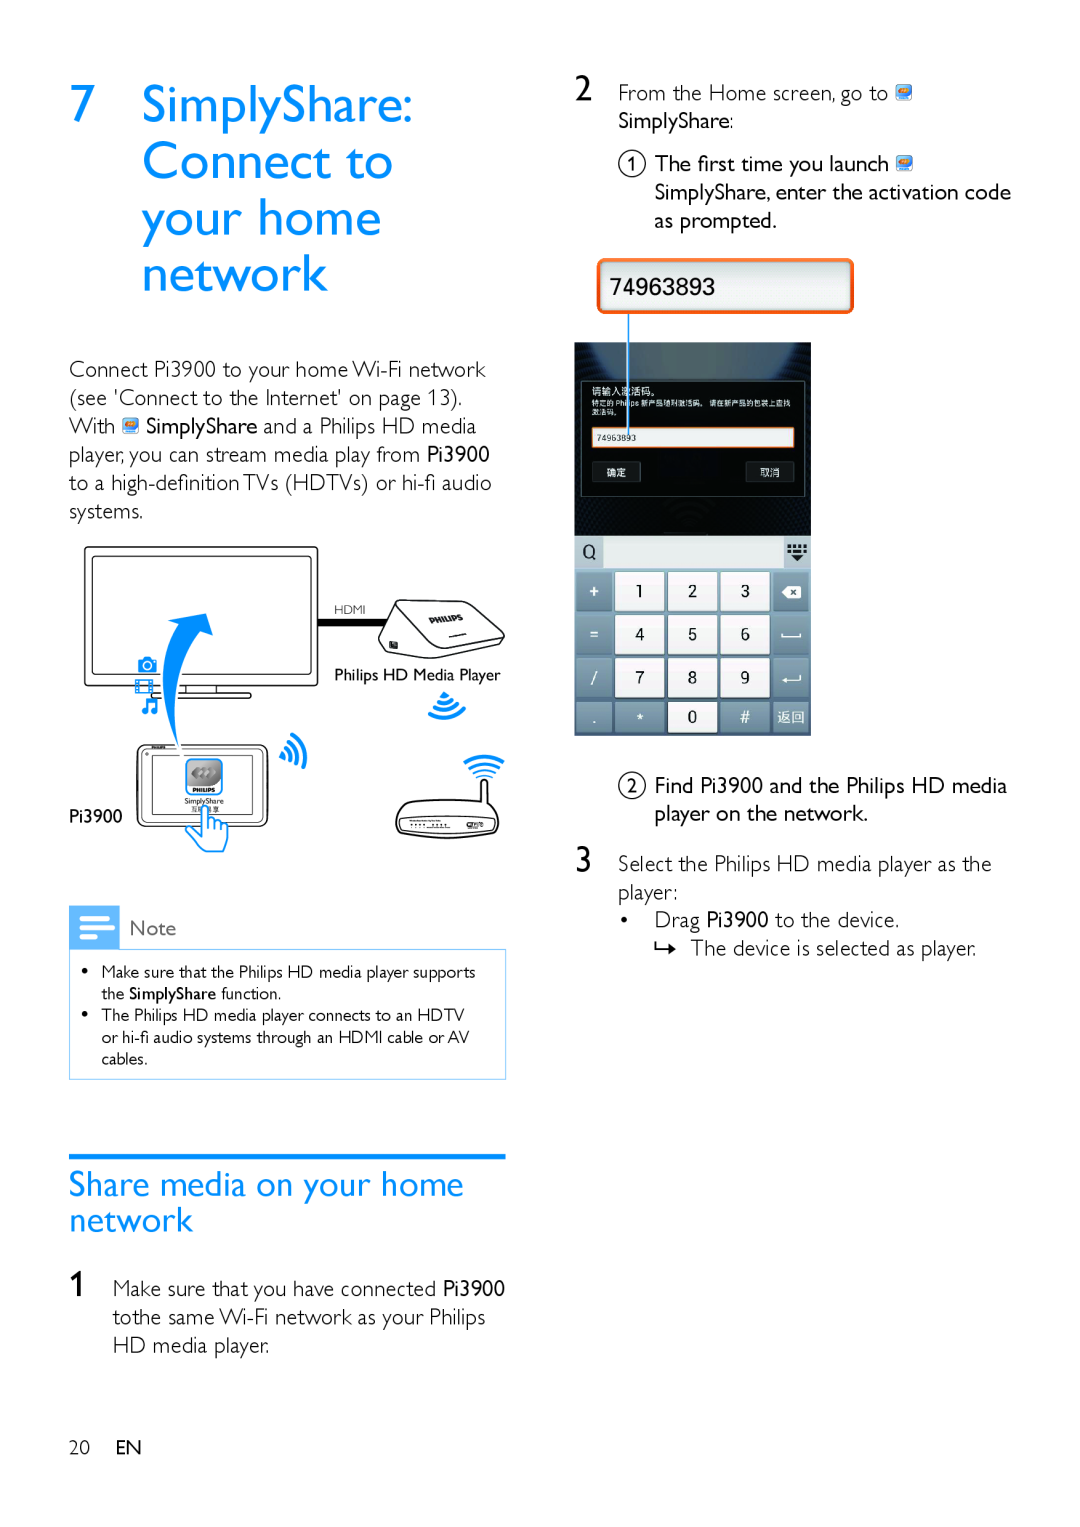 Philips PI3900 manual Share media on your home network, 74963893, SimplyShare Connect to your home network 